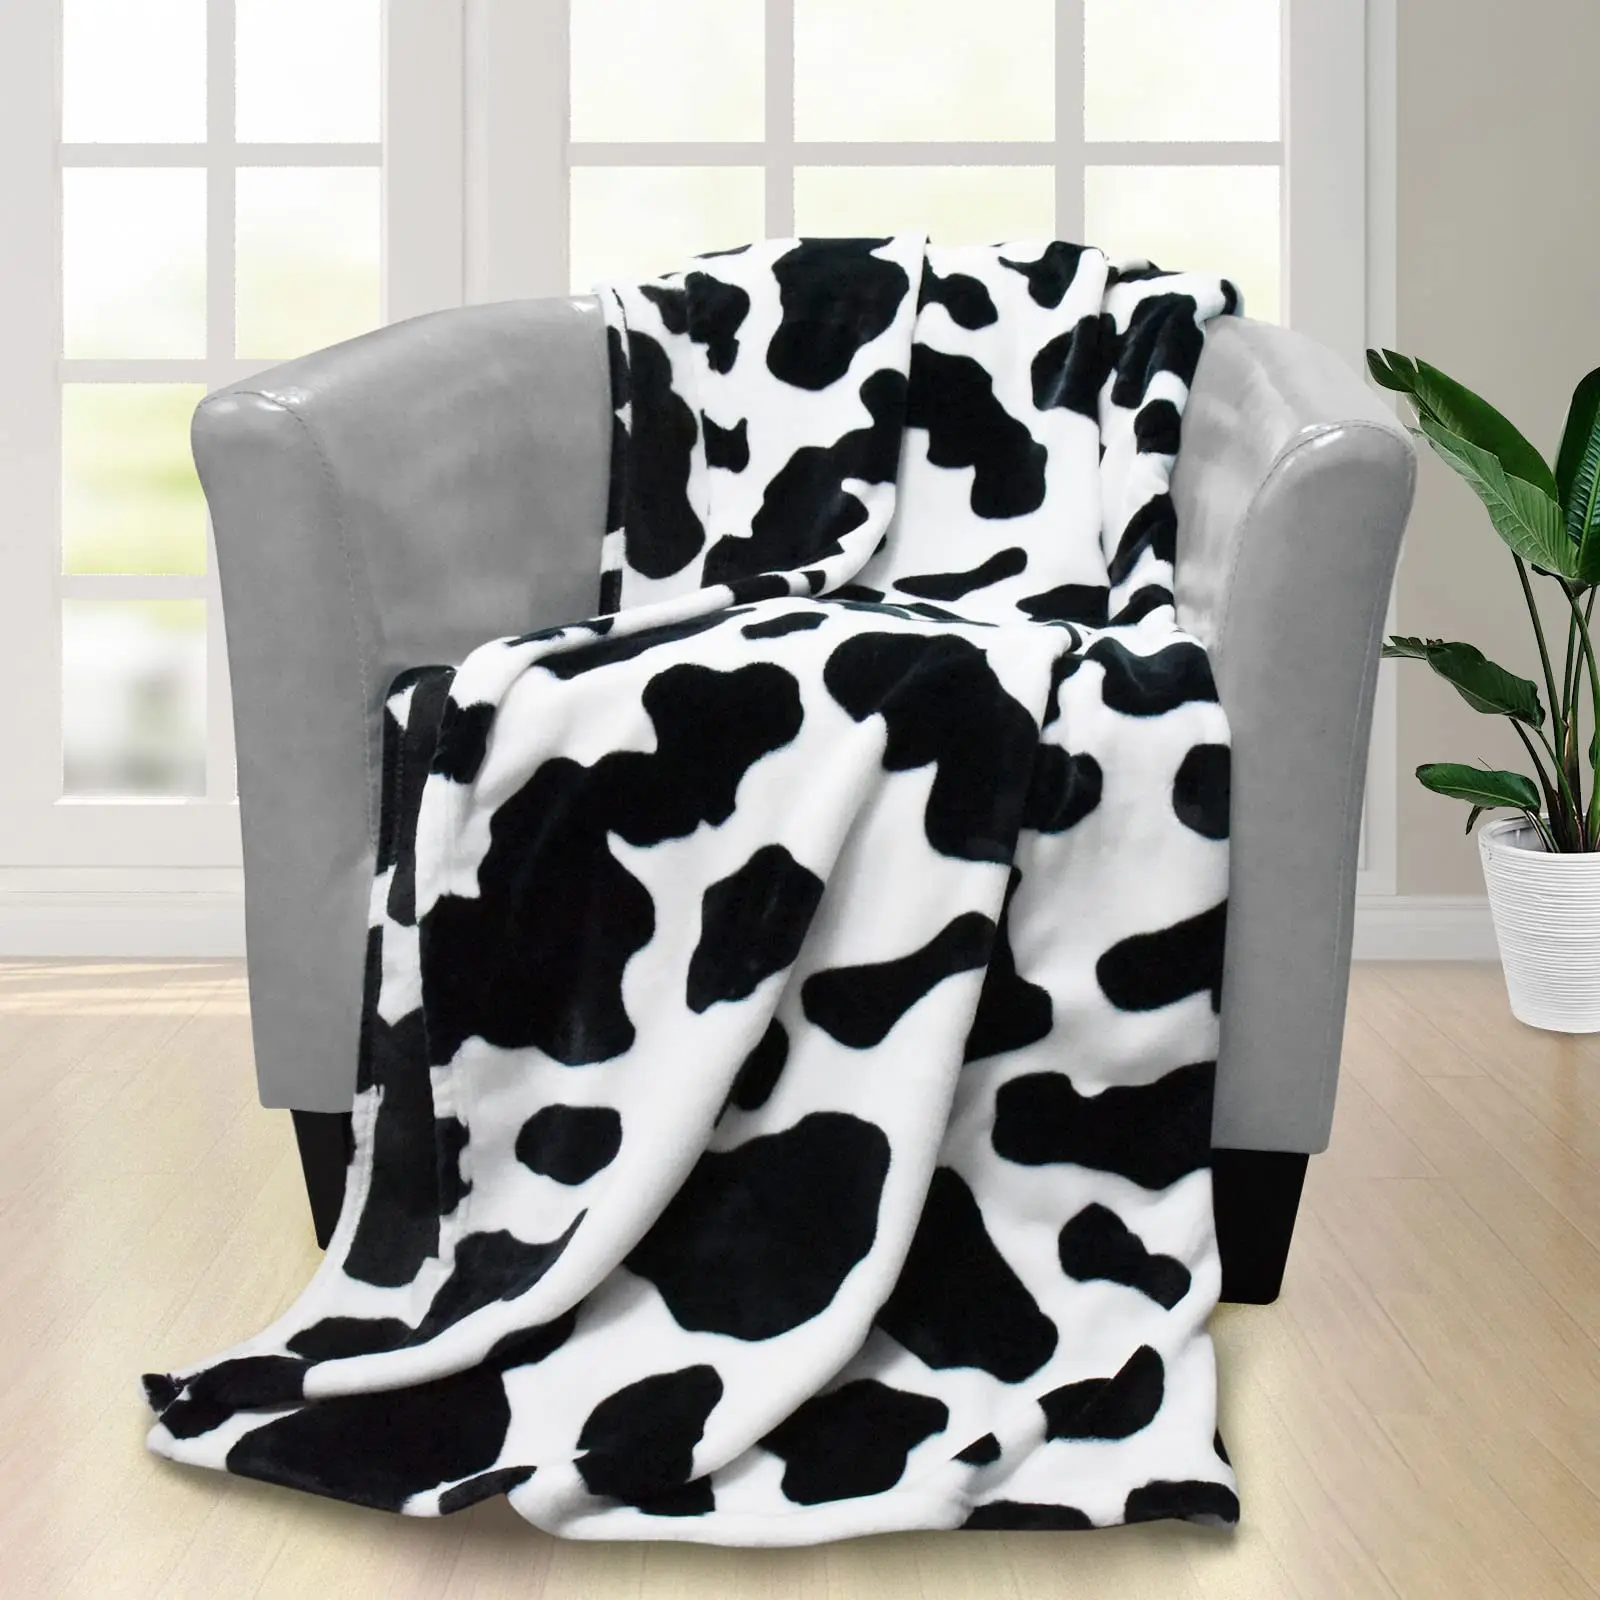 Cow Print Blanket Black White Bed Cow Throw Blankets Soft Sofa Cozy Warm Plush Gifts for Bedroom Decor Highland Cattle Bedspread